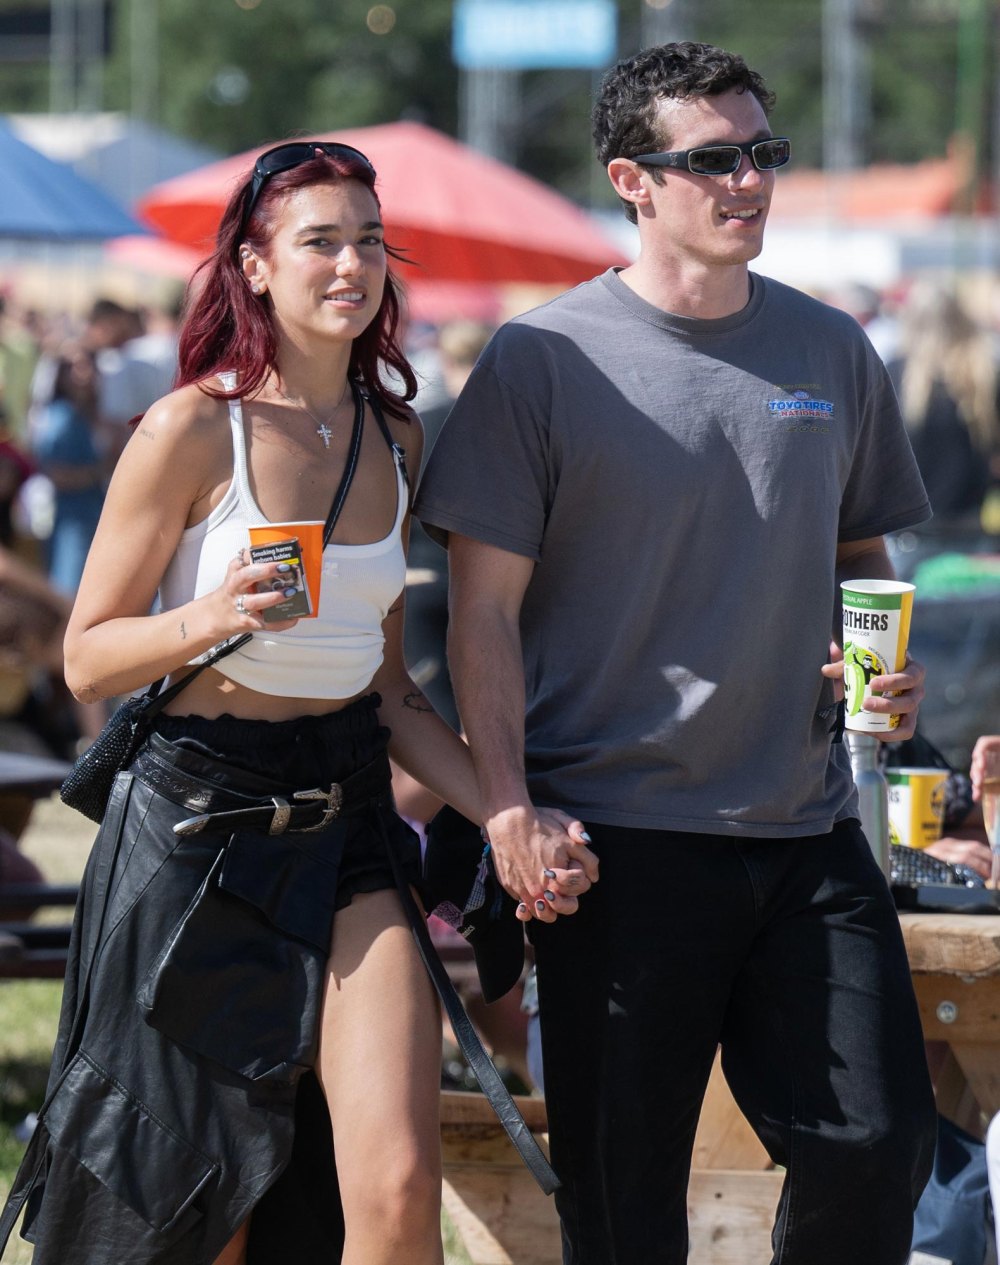 Dua Lipa and Calum Turner cutely hold hands during a date at Glastonbury Festival in the UK